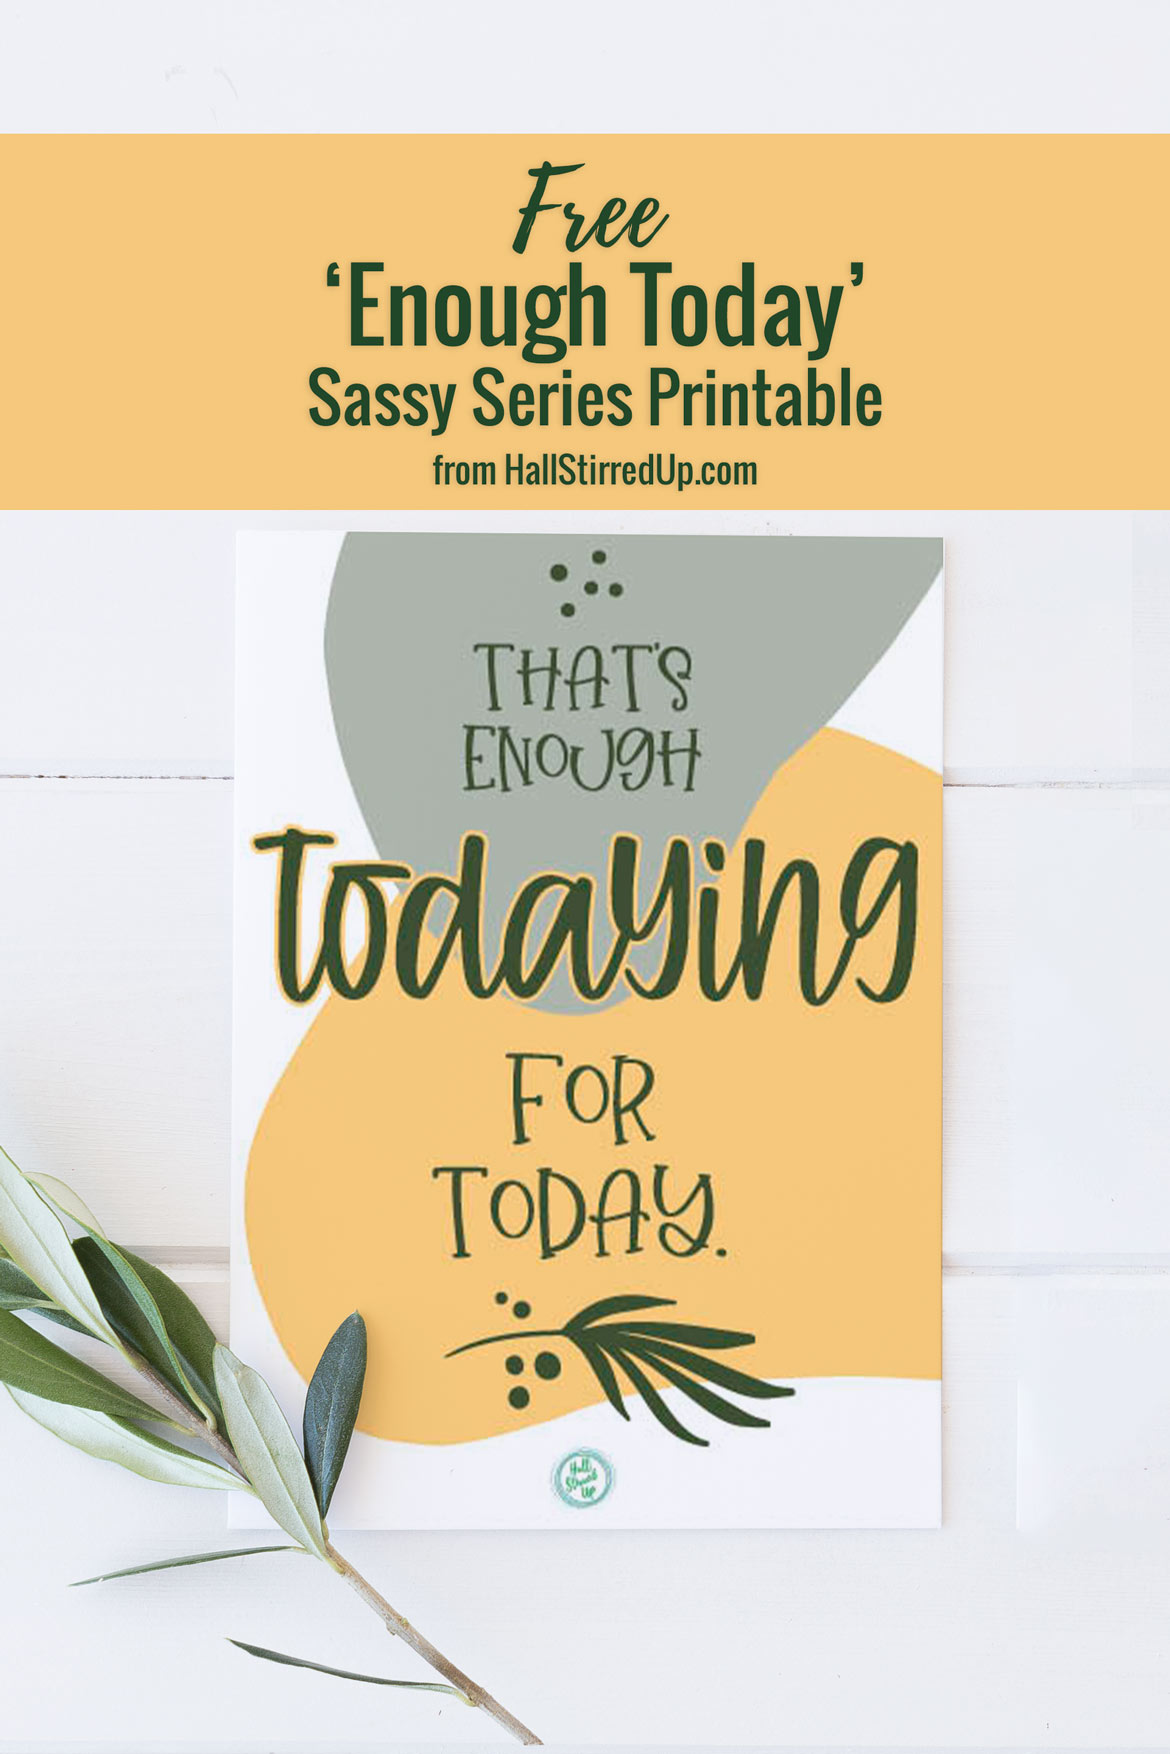 That's enough for today! Download a free Sassy Series printable